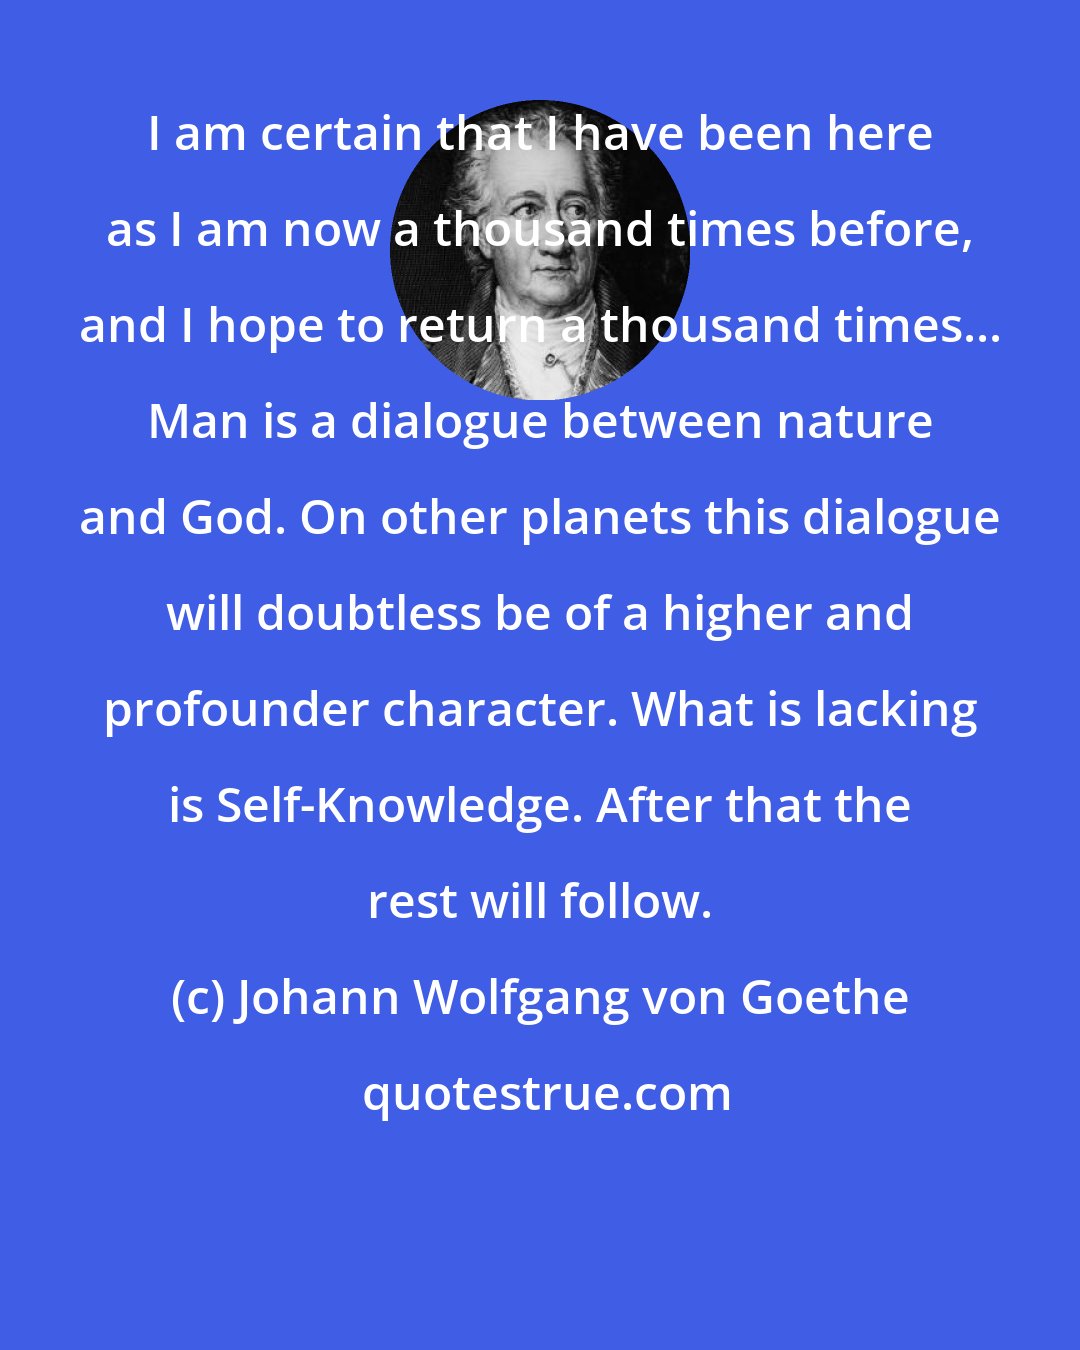 Johann Wolfgang von Goethe: I am certain that I have been here as I am now a thousand times before, and I hope to return a thousand times... Man is a dialogue between nature and God. On other planets this dialogue will doubtless be of a higher and profounder character. What is lacking is Self-Knowledge. After that the rest will follow.